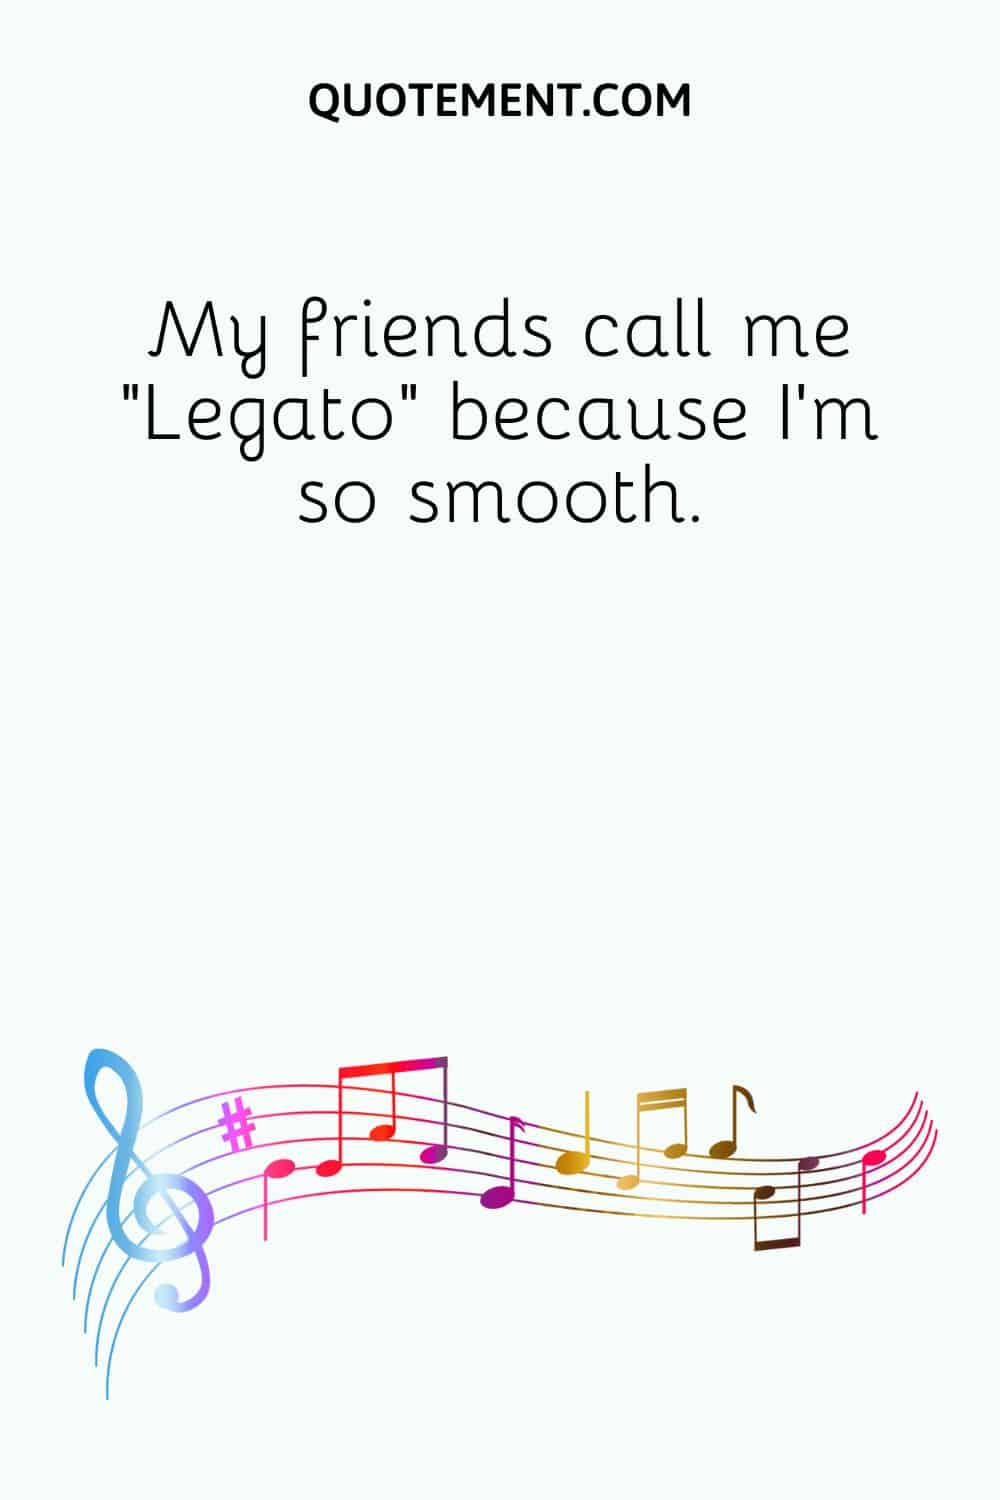 My friends call me Legato because I'm so smooth